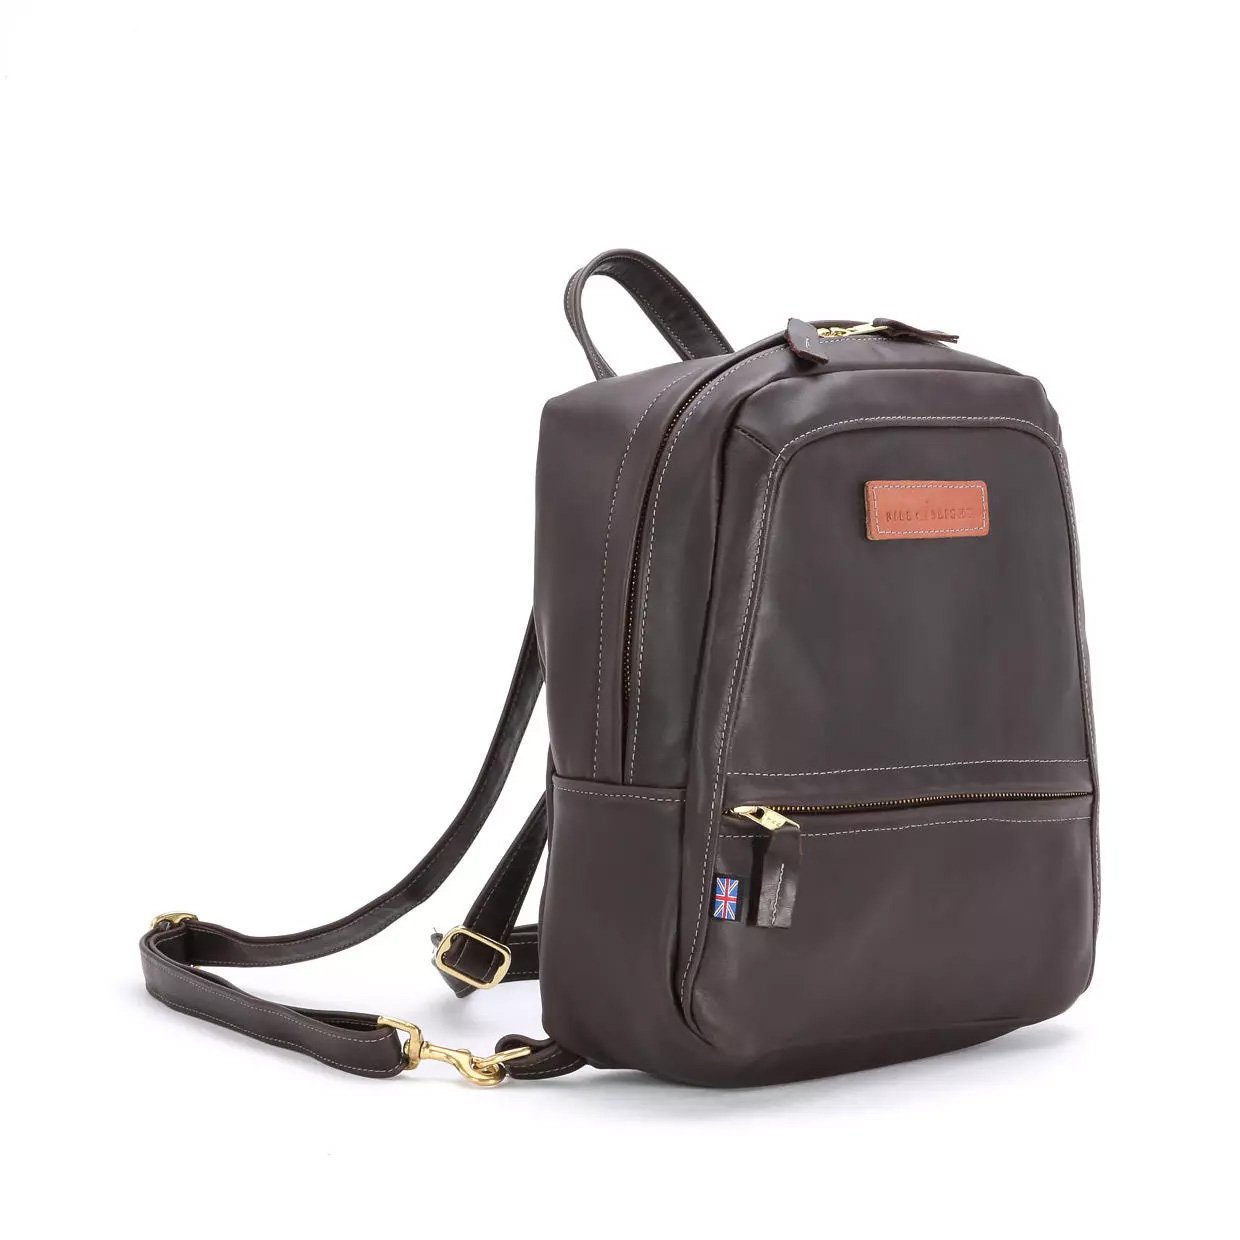 Brow ladies backpack product image